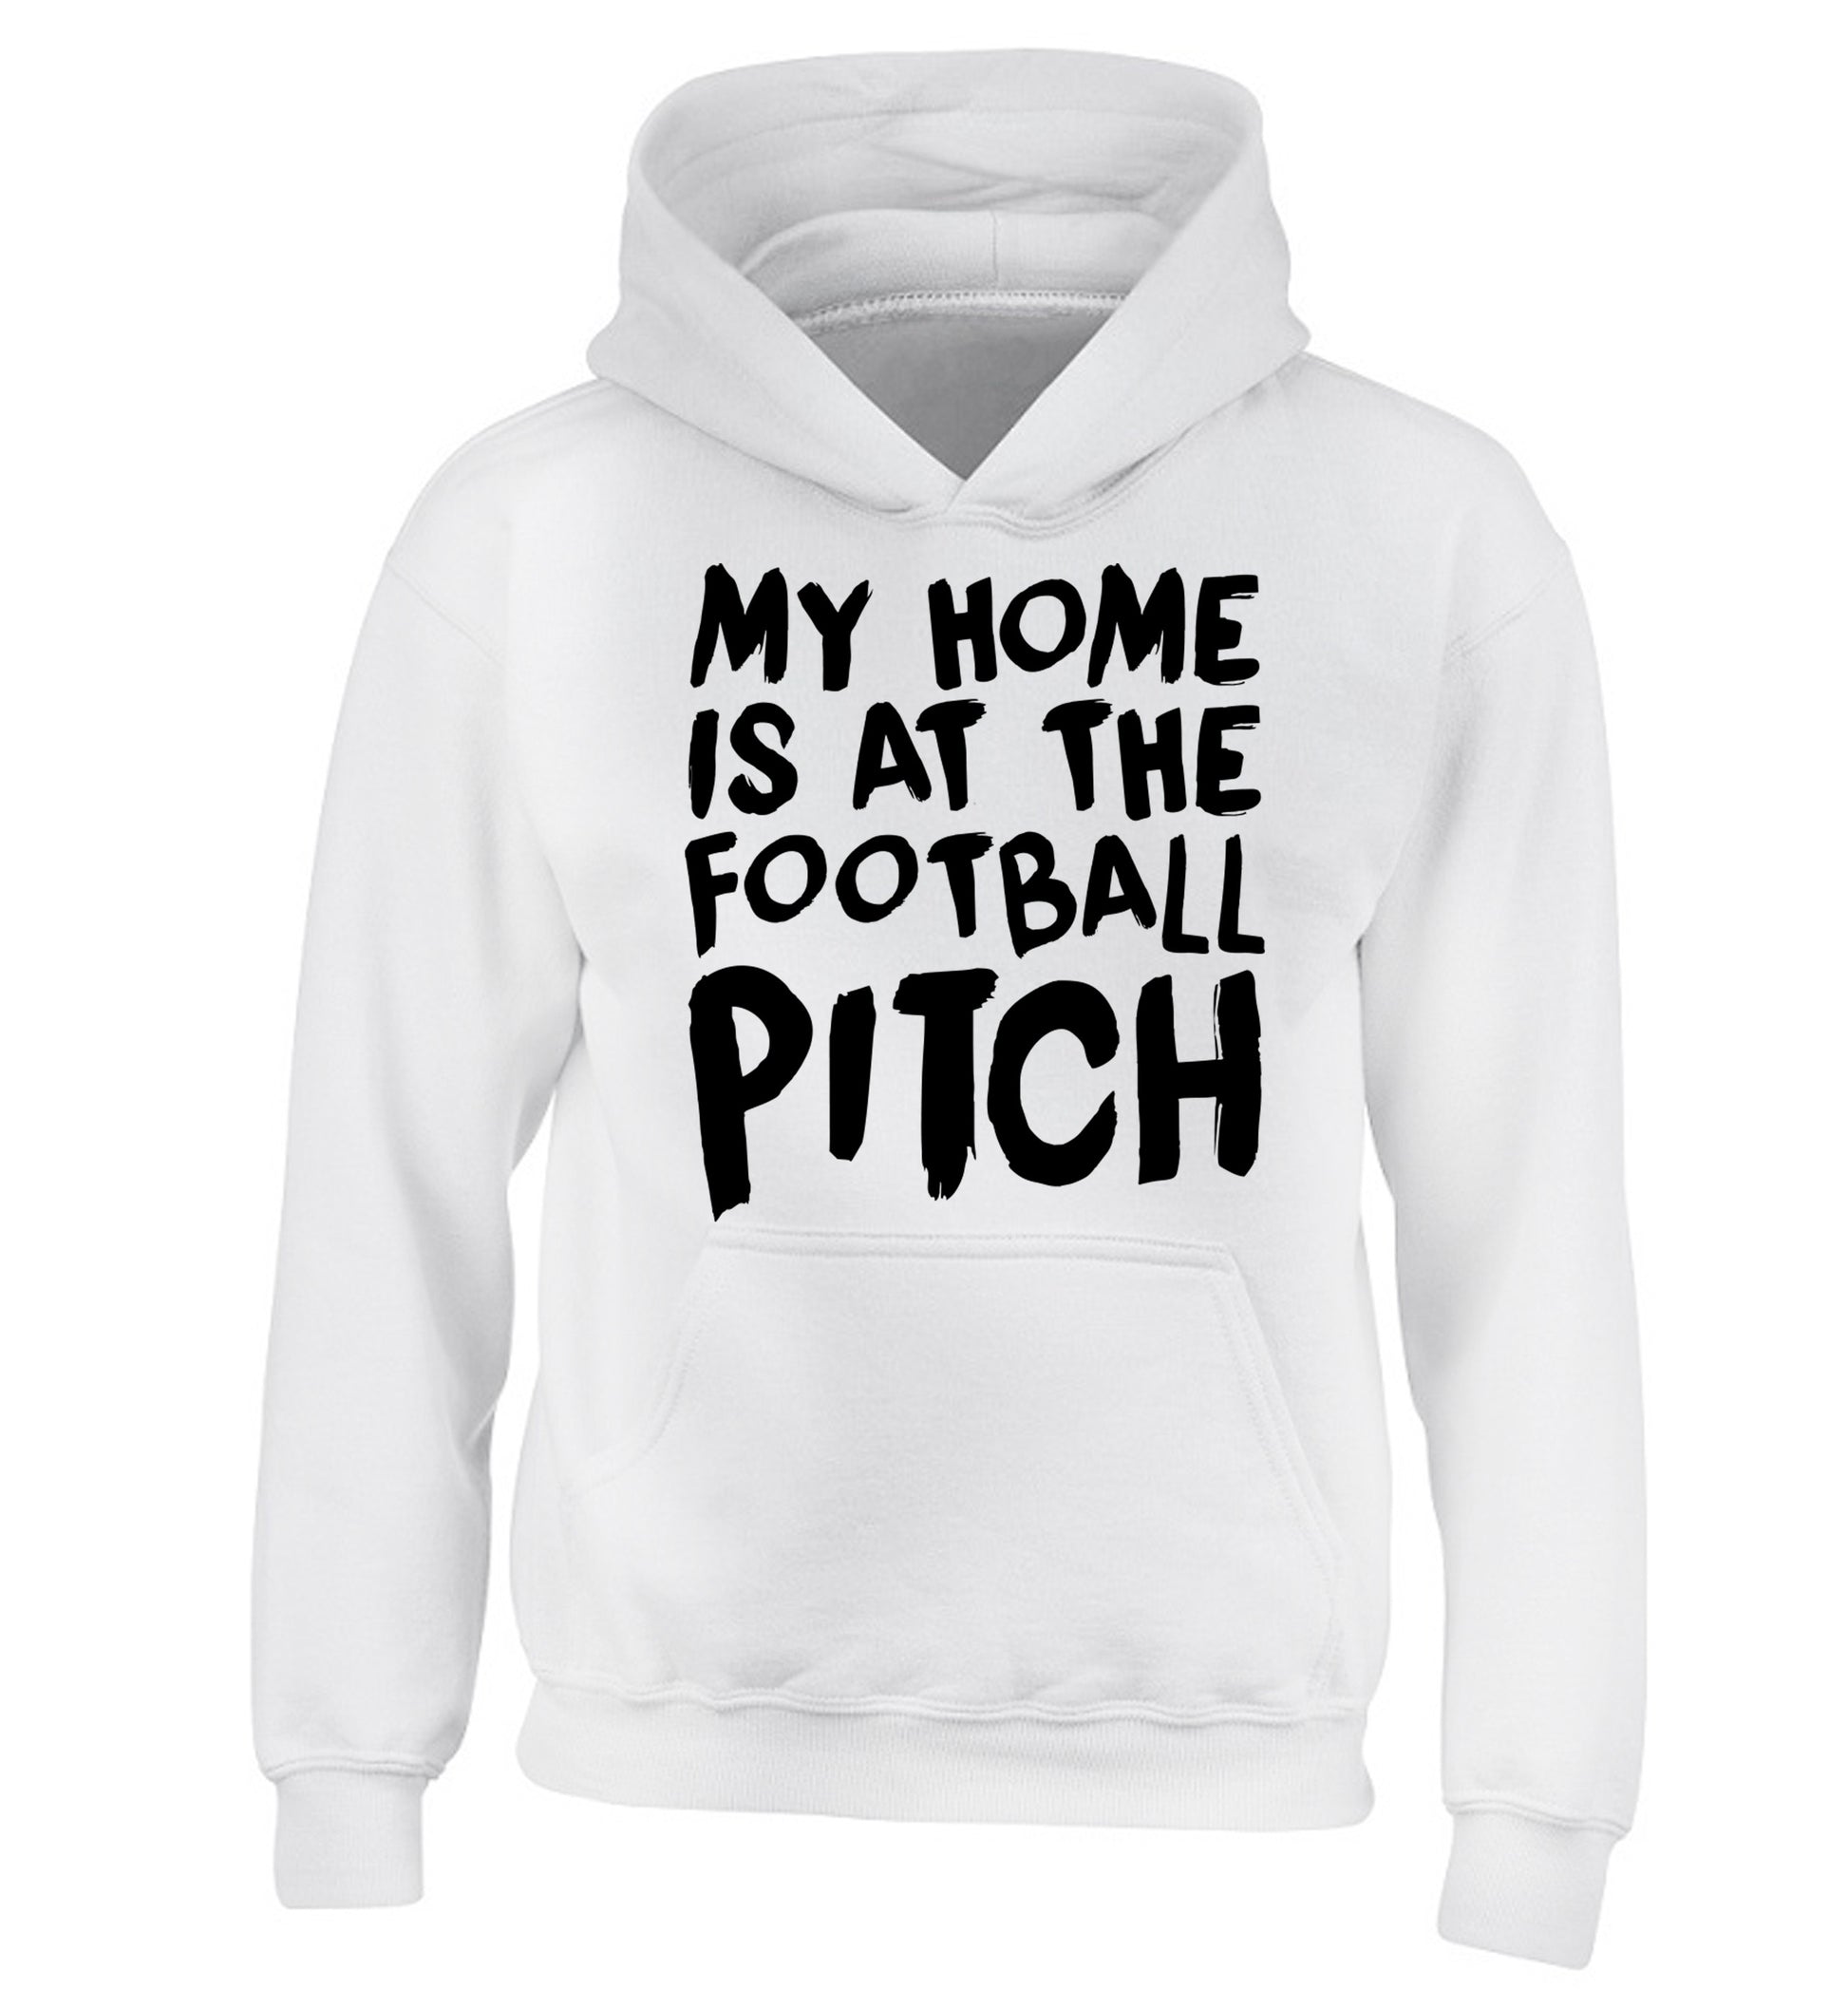 My home is at the football pitch children's white hoodie 12-14 Years